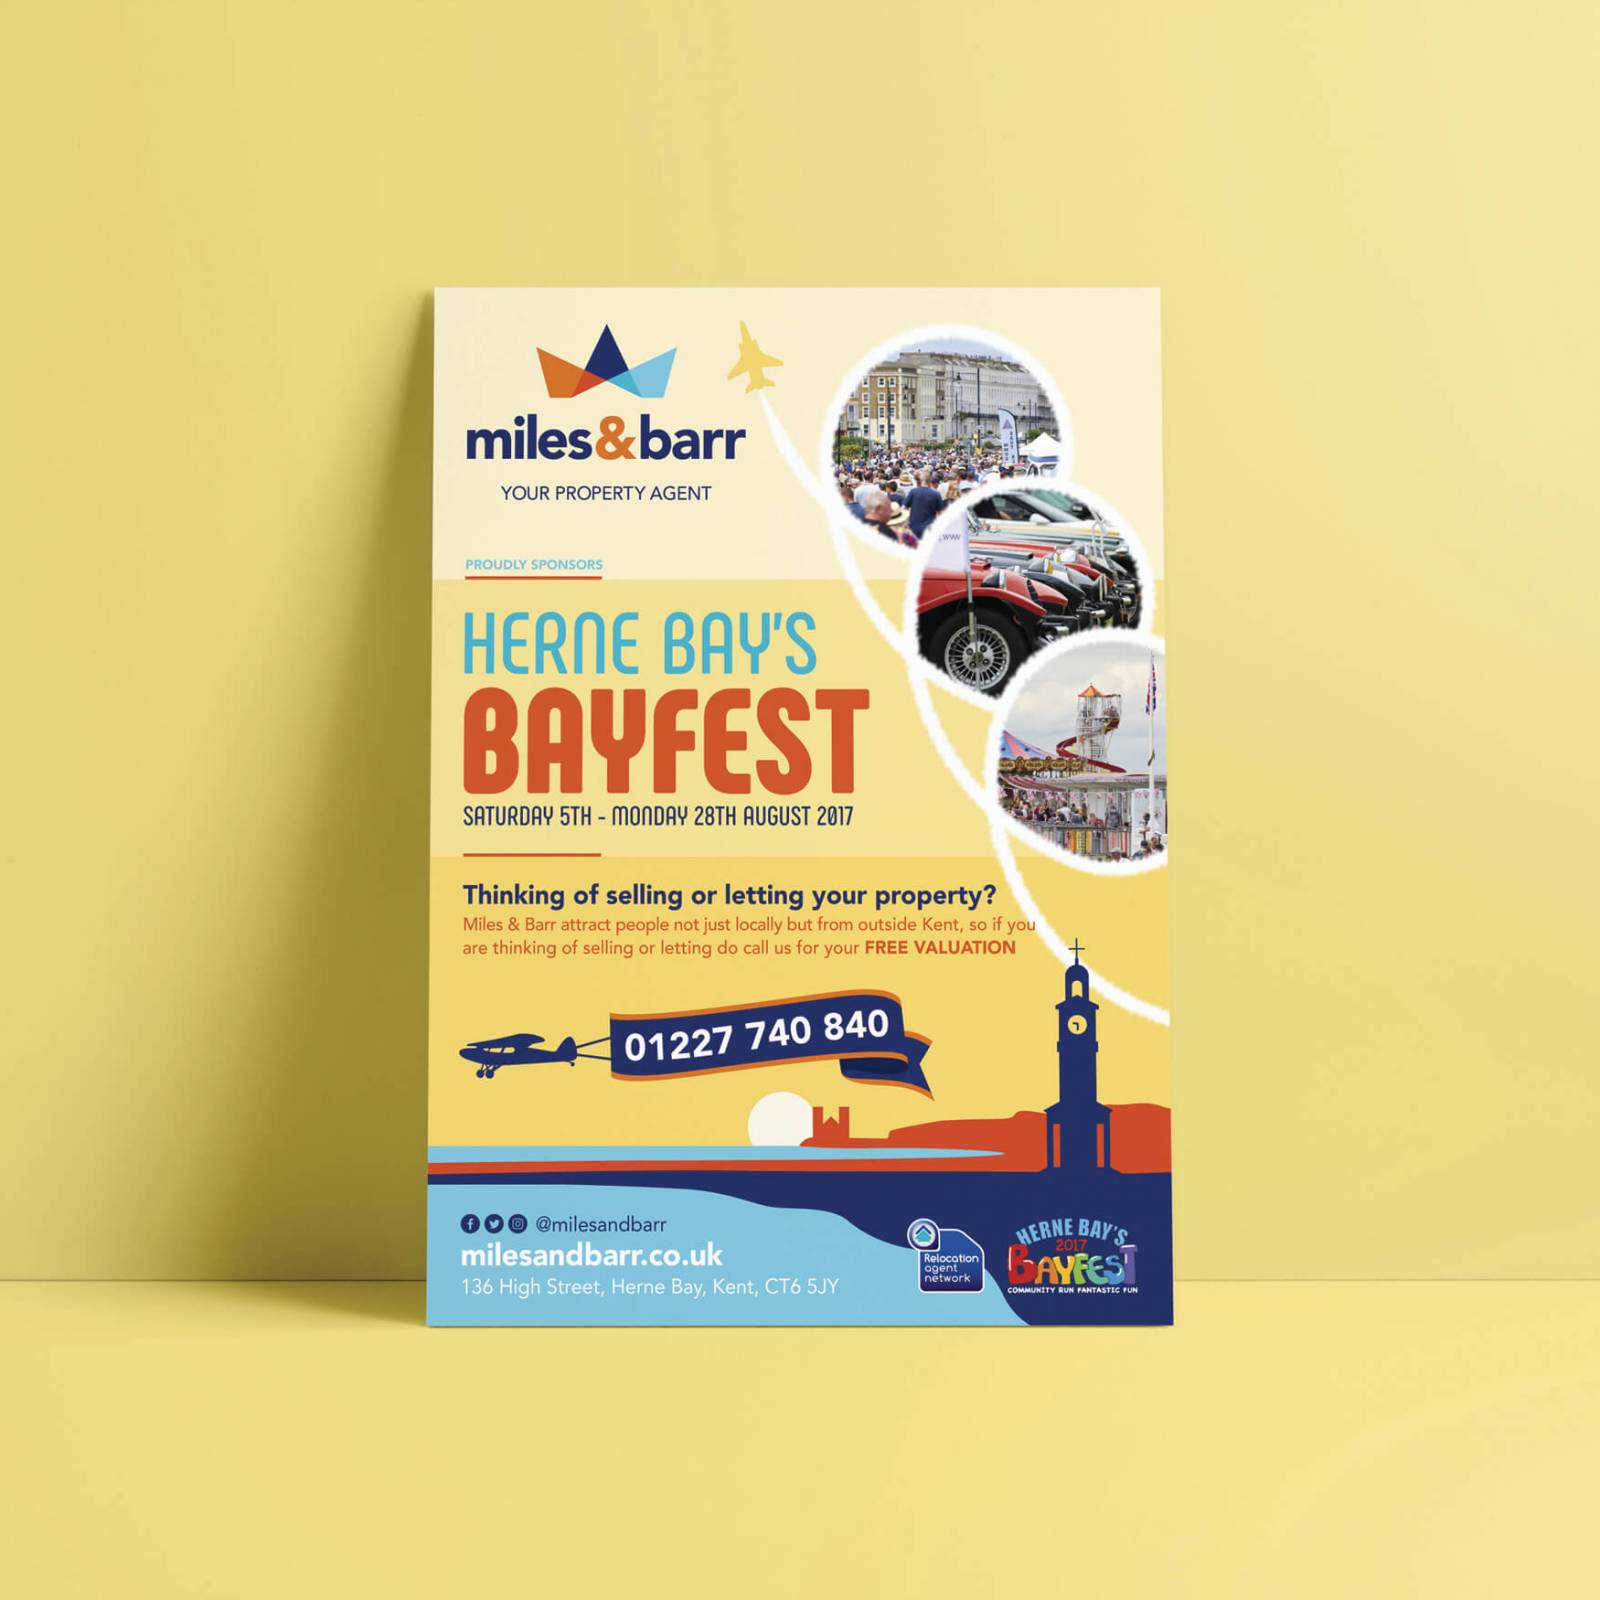 Miles-and-barr-Herne-Bay-Bayfest-Graphic-Design-Agency-Canterbury.jpg